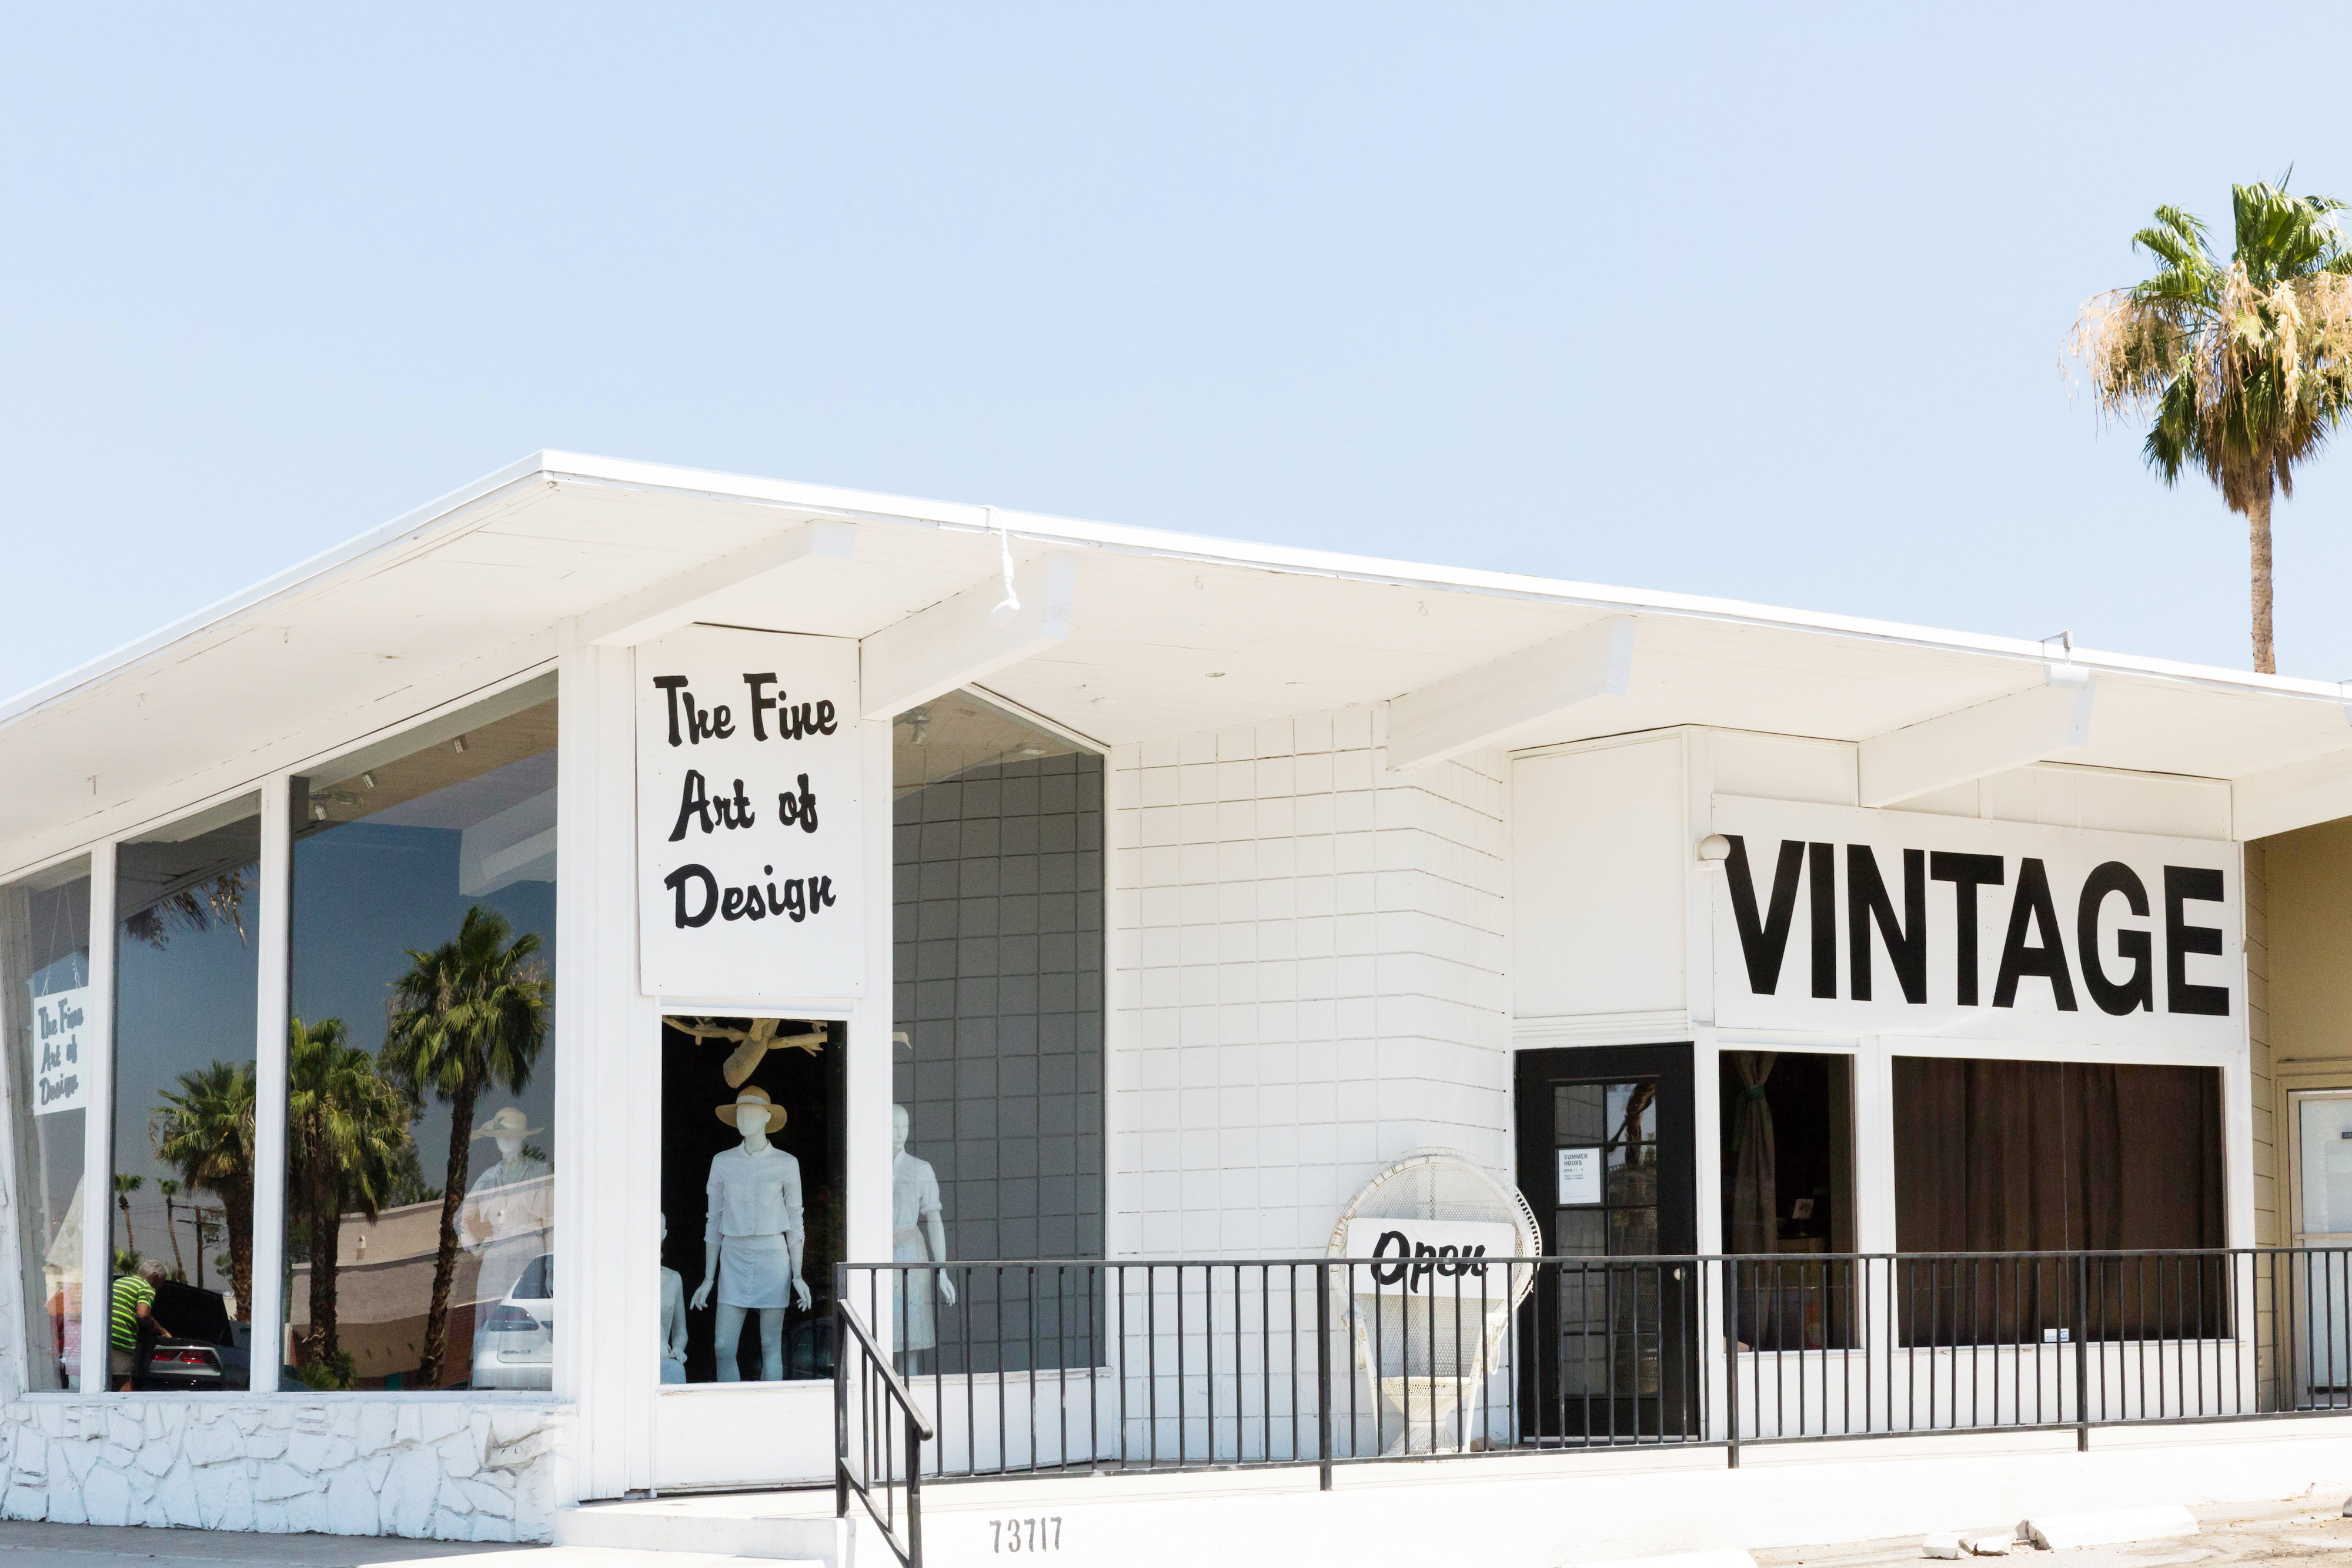 A vintage store in palm springs with a bright blue sky and palm tree in the background.